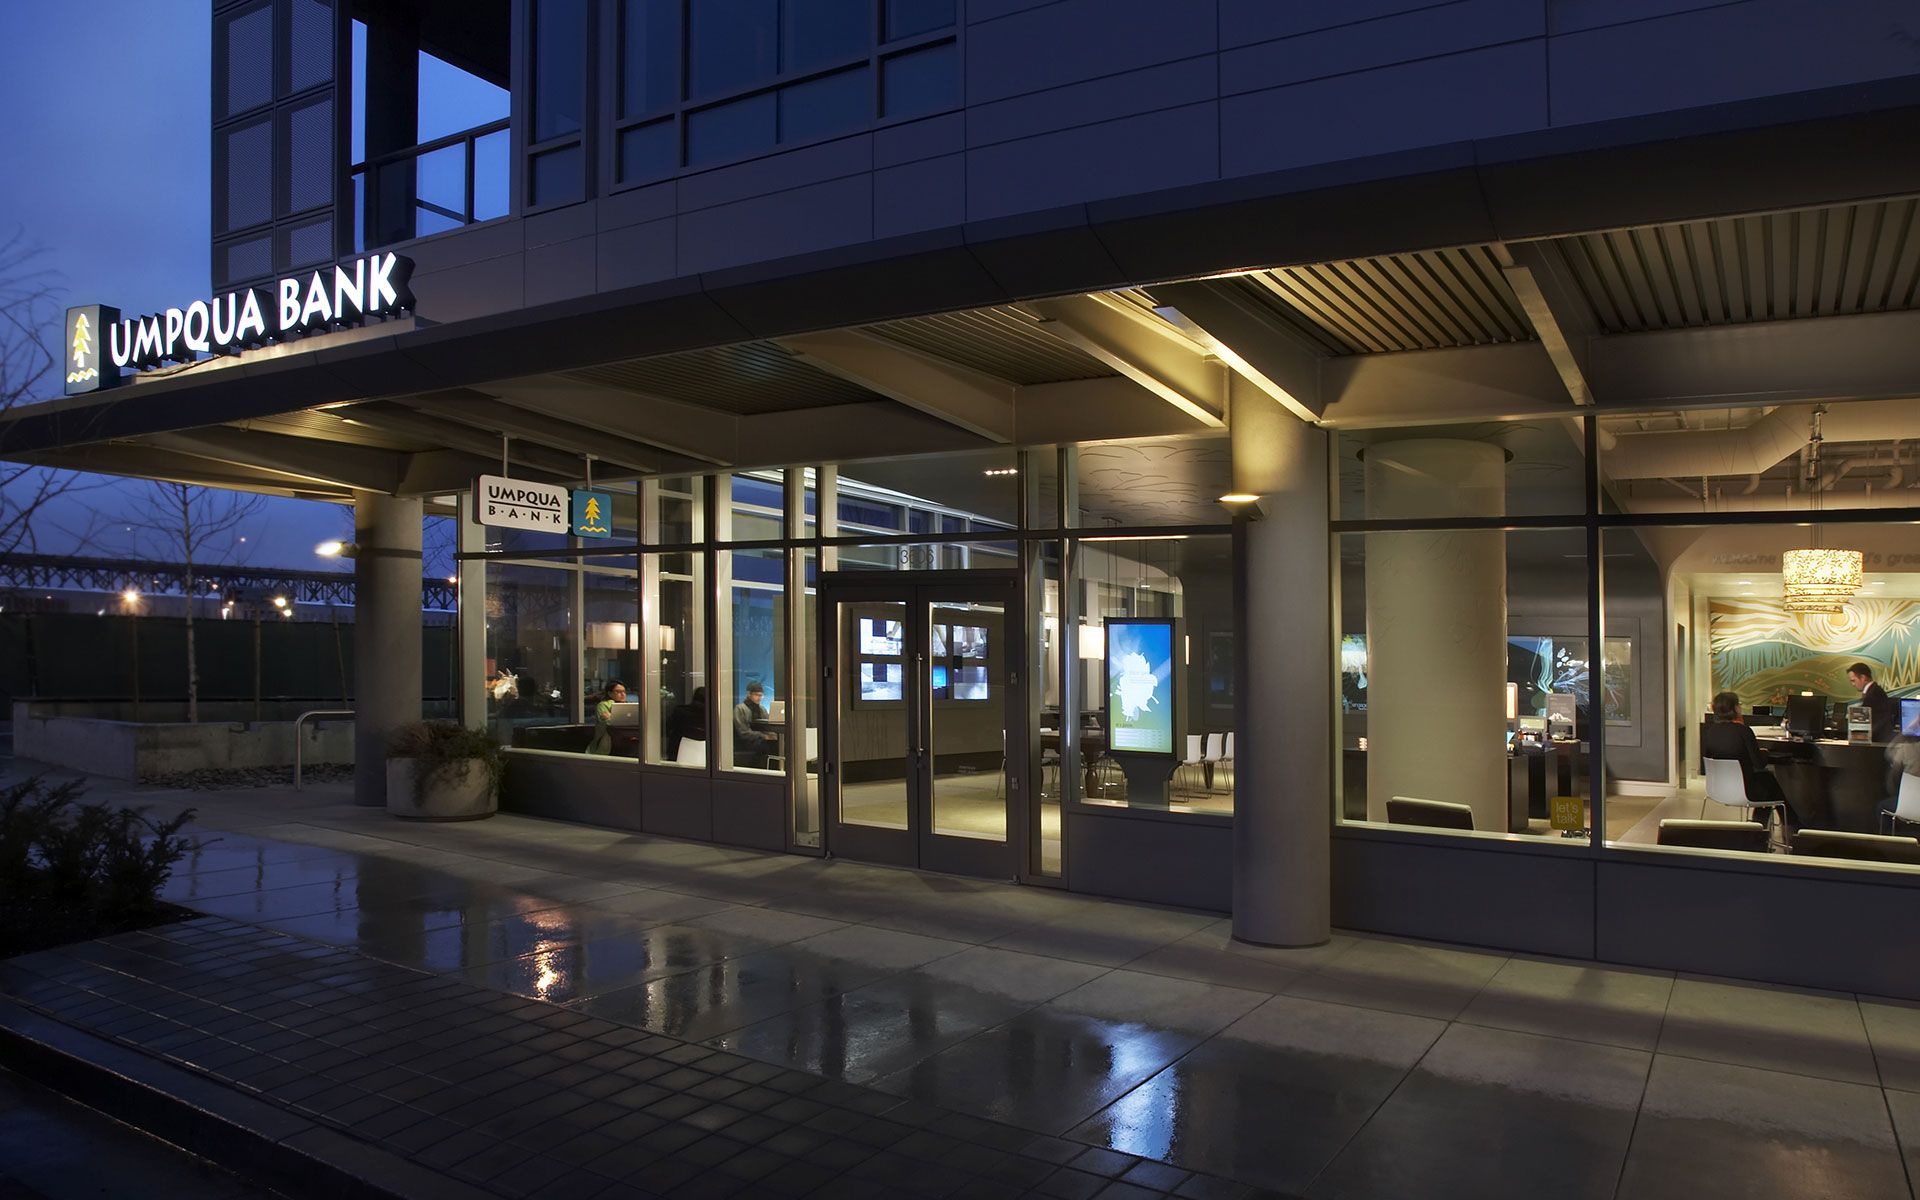 Exterior of Umpqua Bank, featuring large glass windows and doors, with customers 